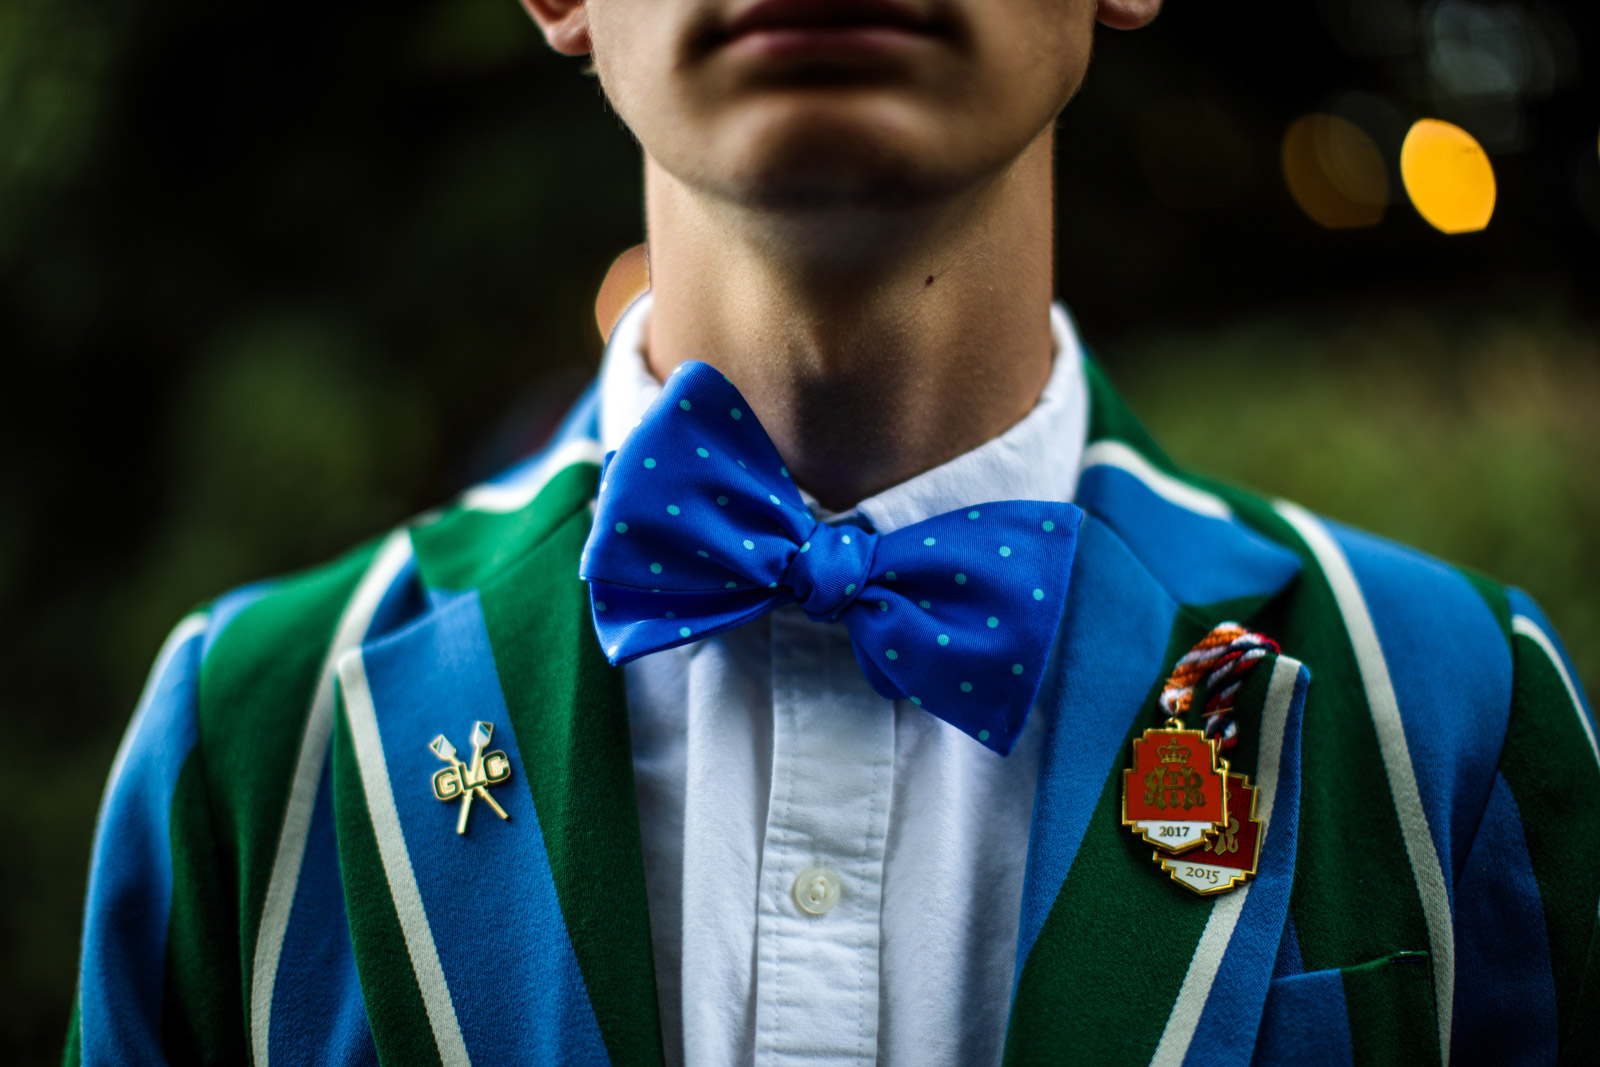  A bow tie is worn by a member of the Seattle-based Green Lake crew at the Henley Regatta on June 29, 2017 in Henley-on-Thames. 